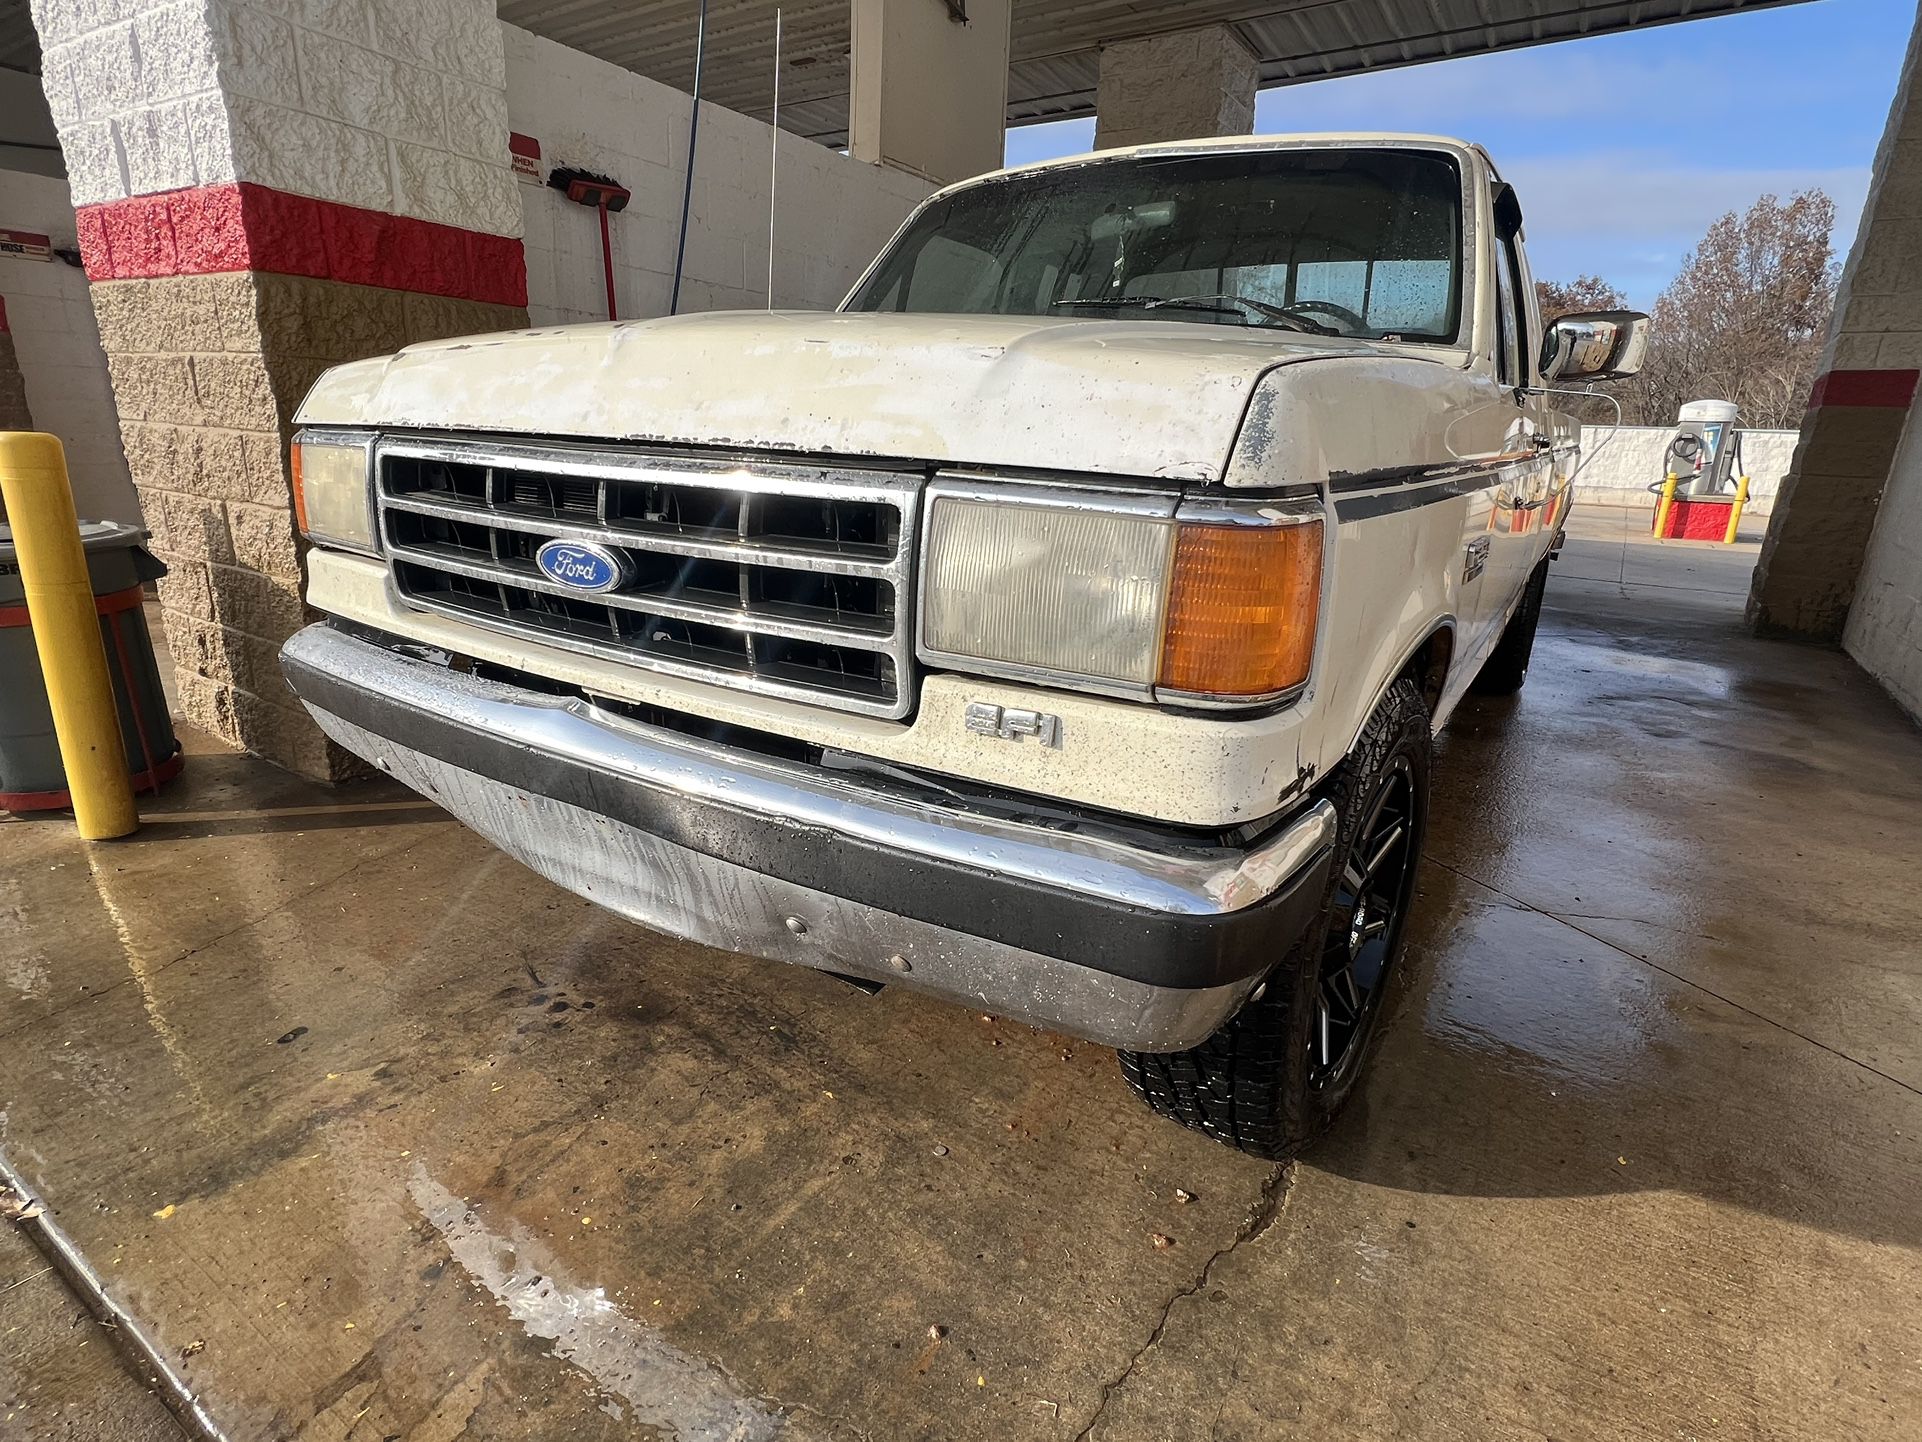 1991 Ford F-250